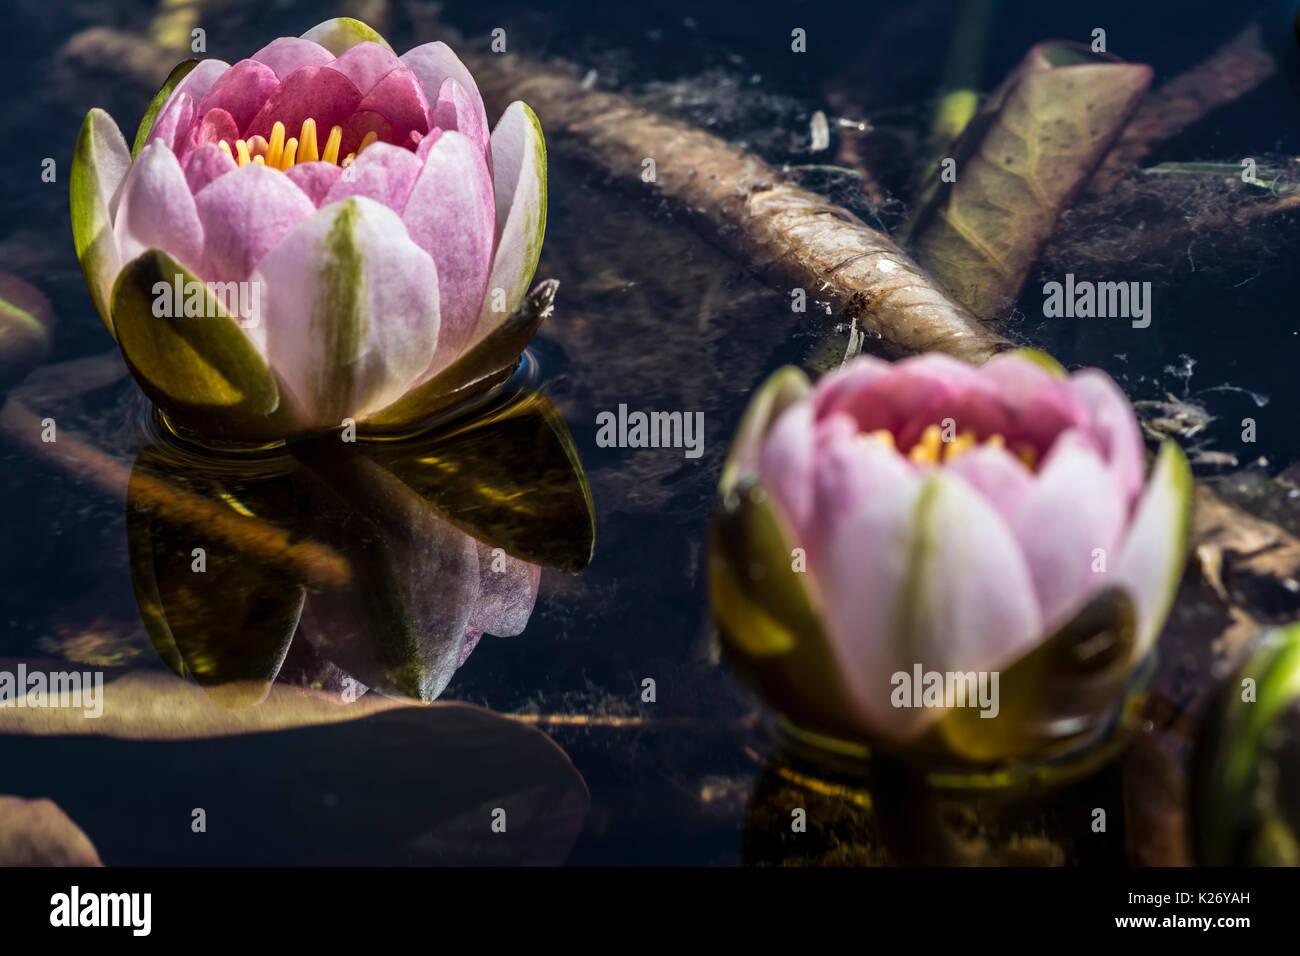 Two Nymphaea 'Mrs Richmond' Waterlilies with selective focus on the waterlily that is reflected in the surface of the water lily pond. Stock Photo